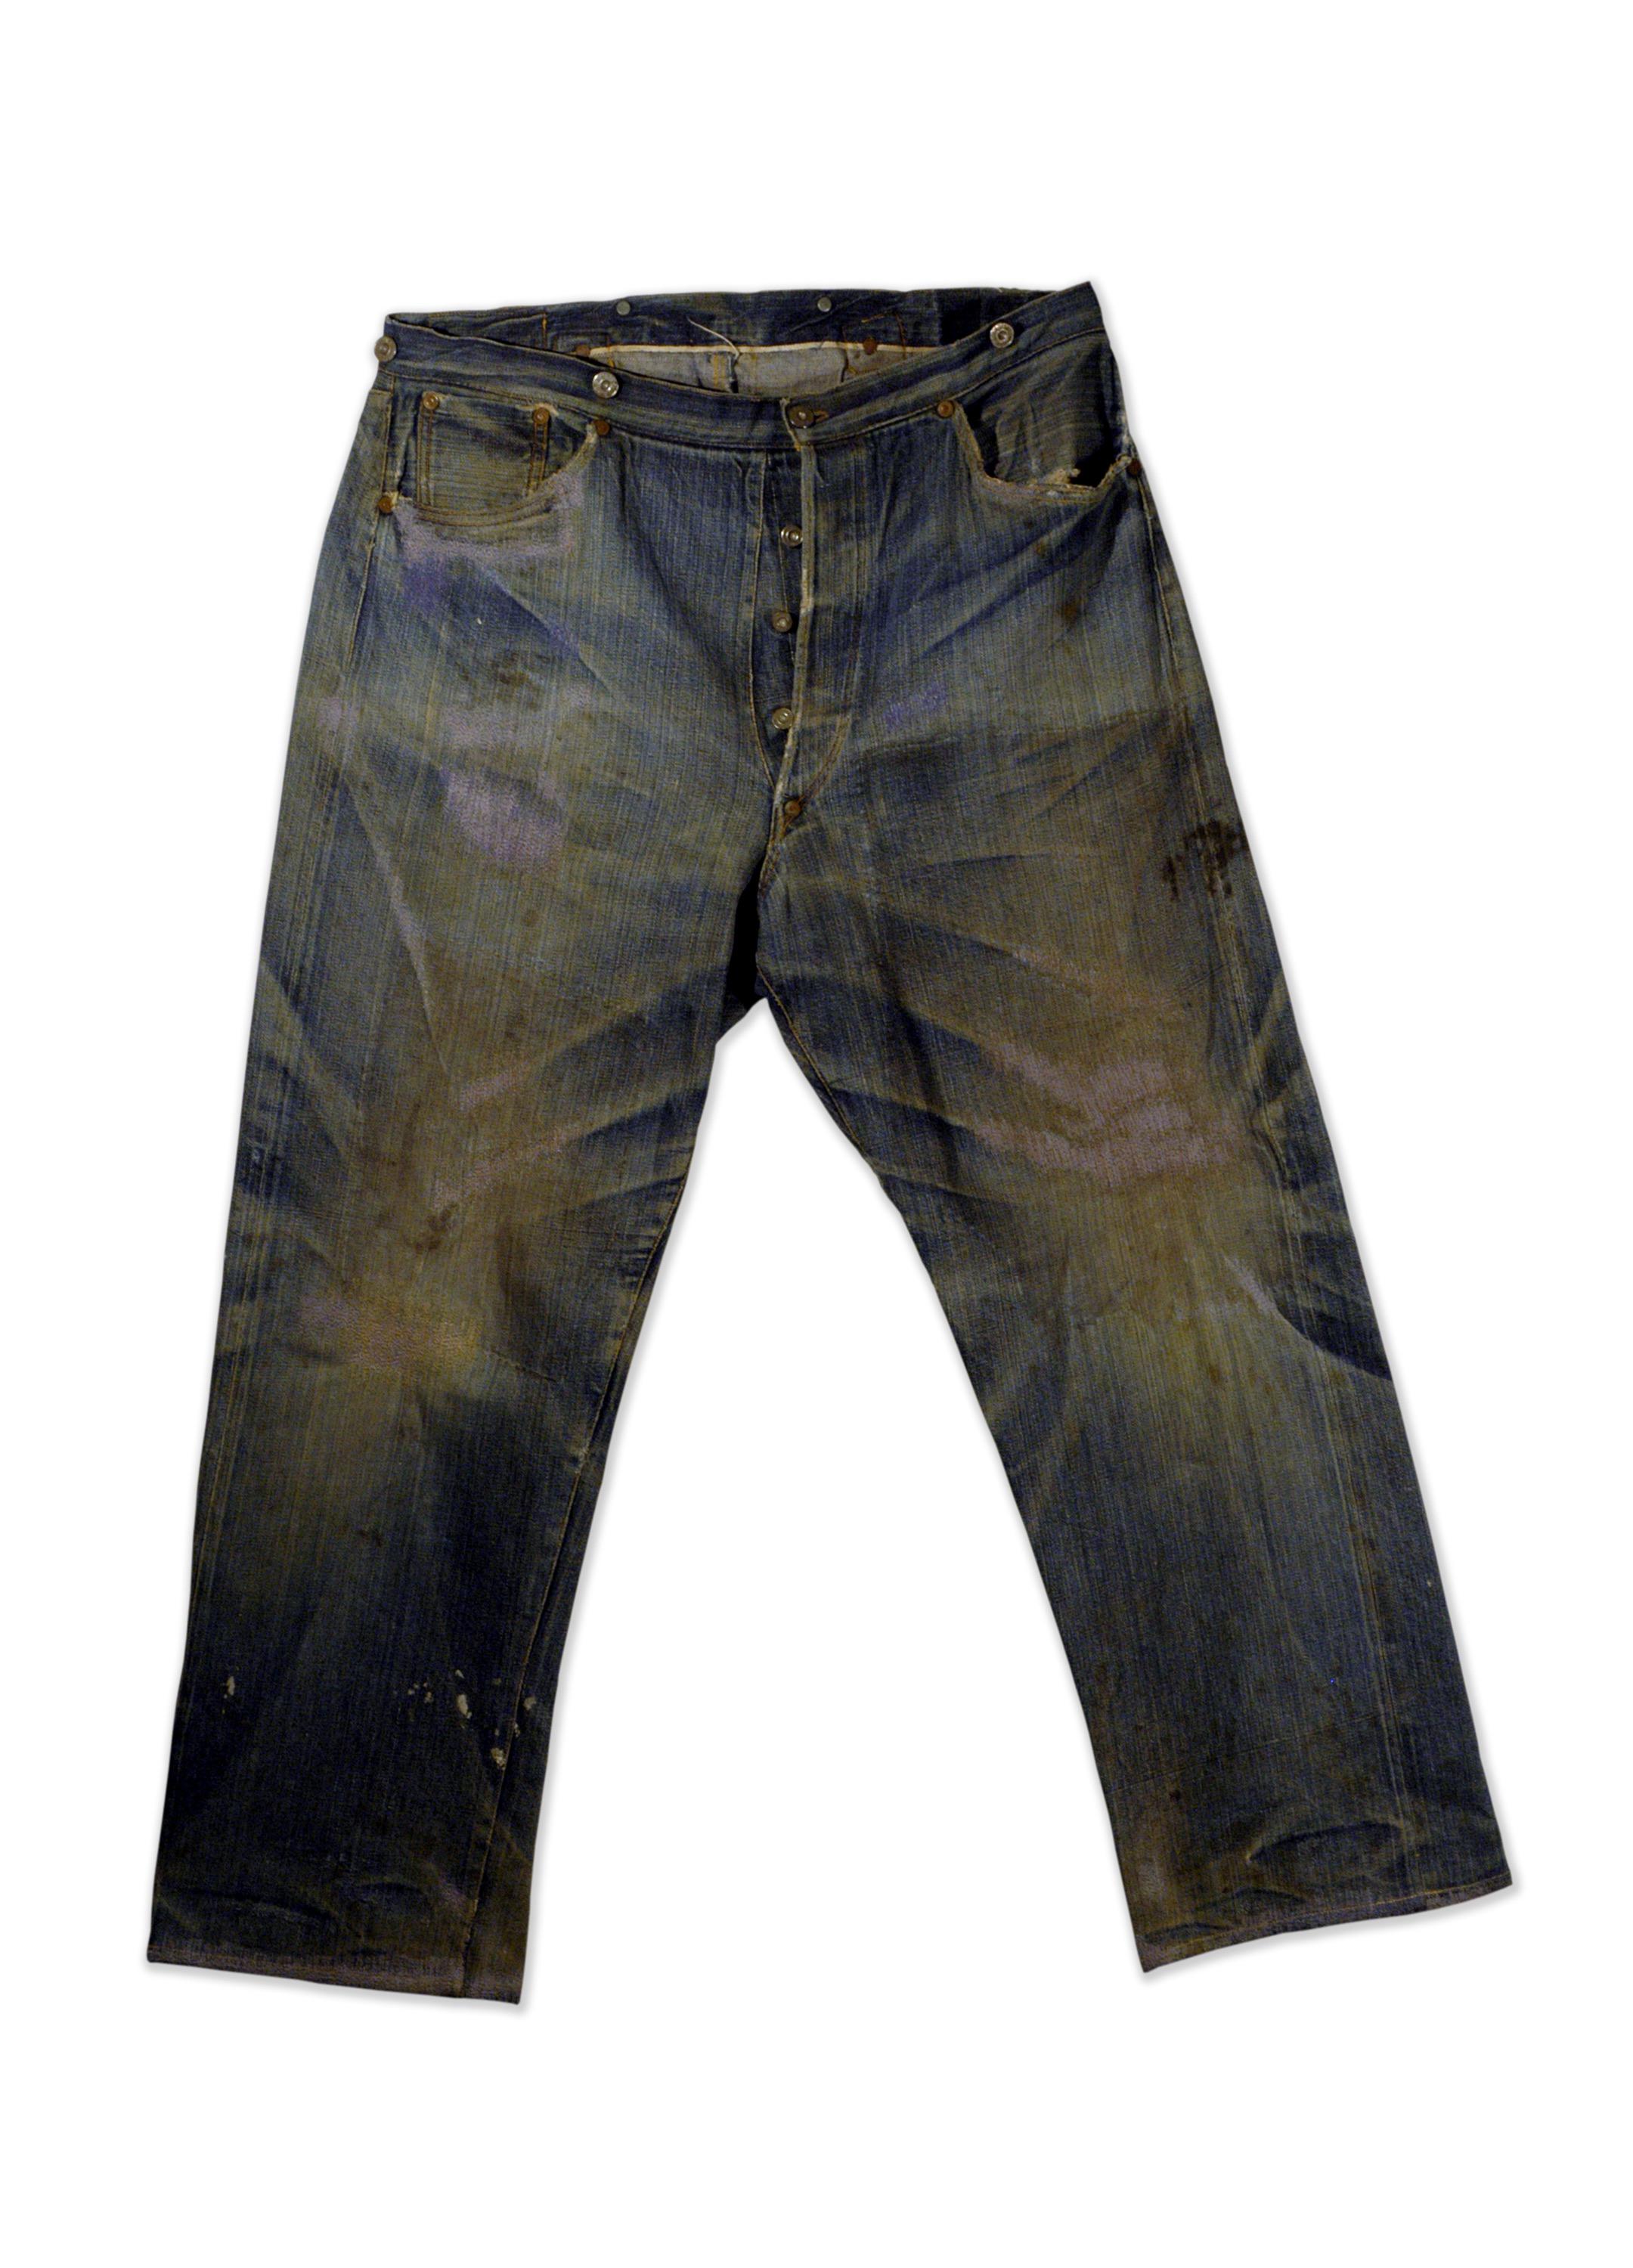 These 140 year old Levi’s. From 1879 if you don’t want to do the math.jpg